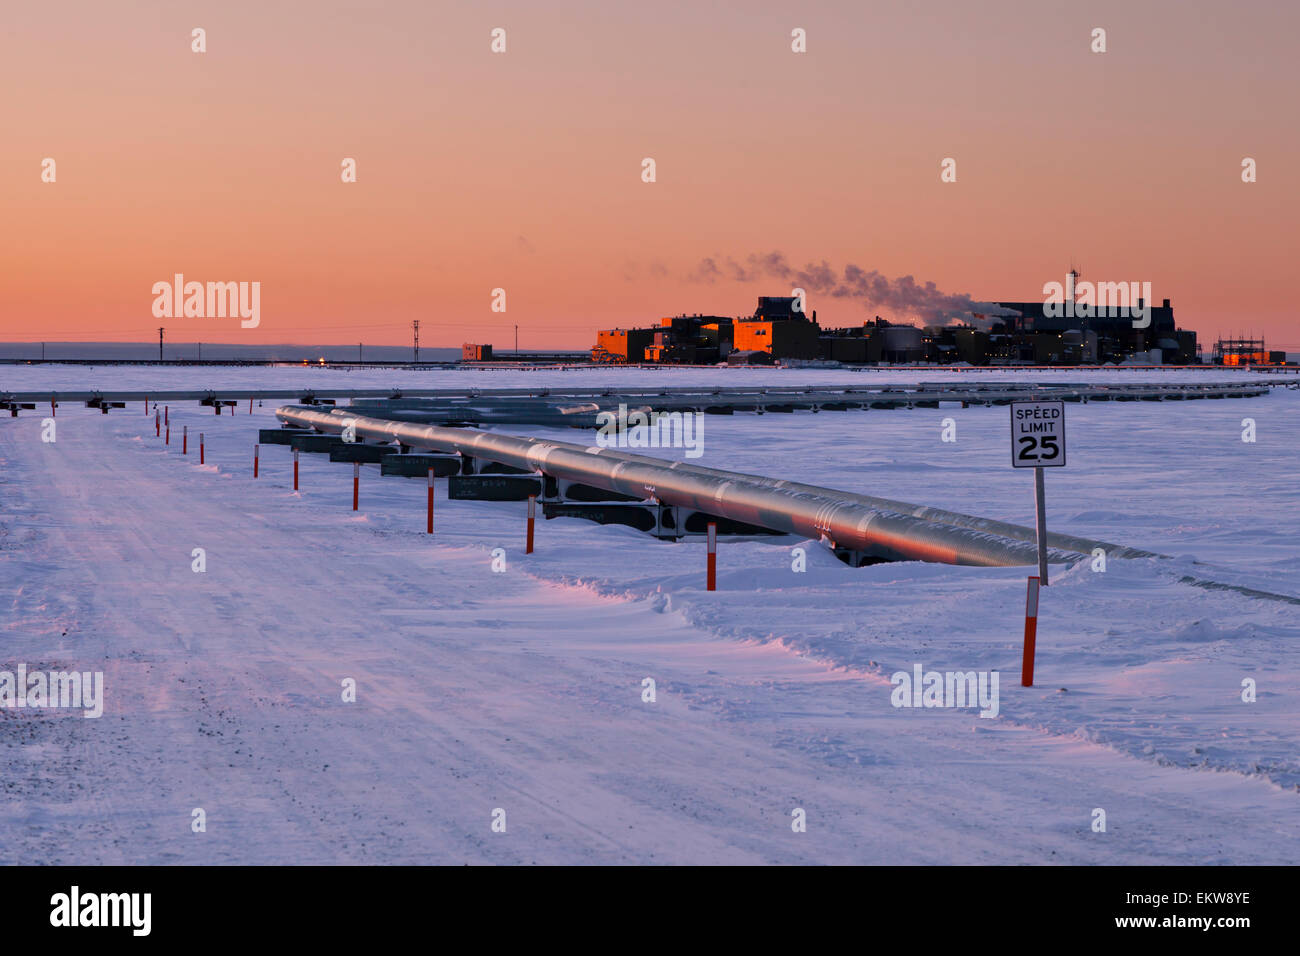 Pipelines And Flow Station 3 (Fs3) In The Prudhoe Bay Oil Field, Arctic Alaska, Winter Stock Photo